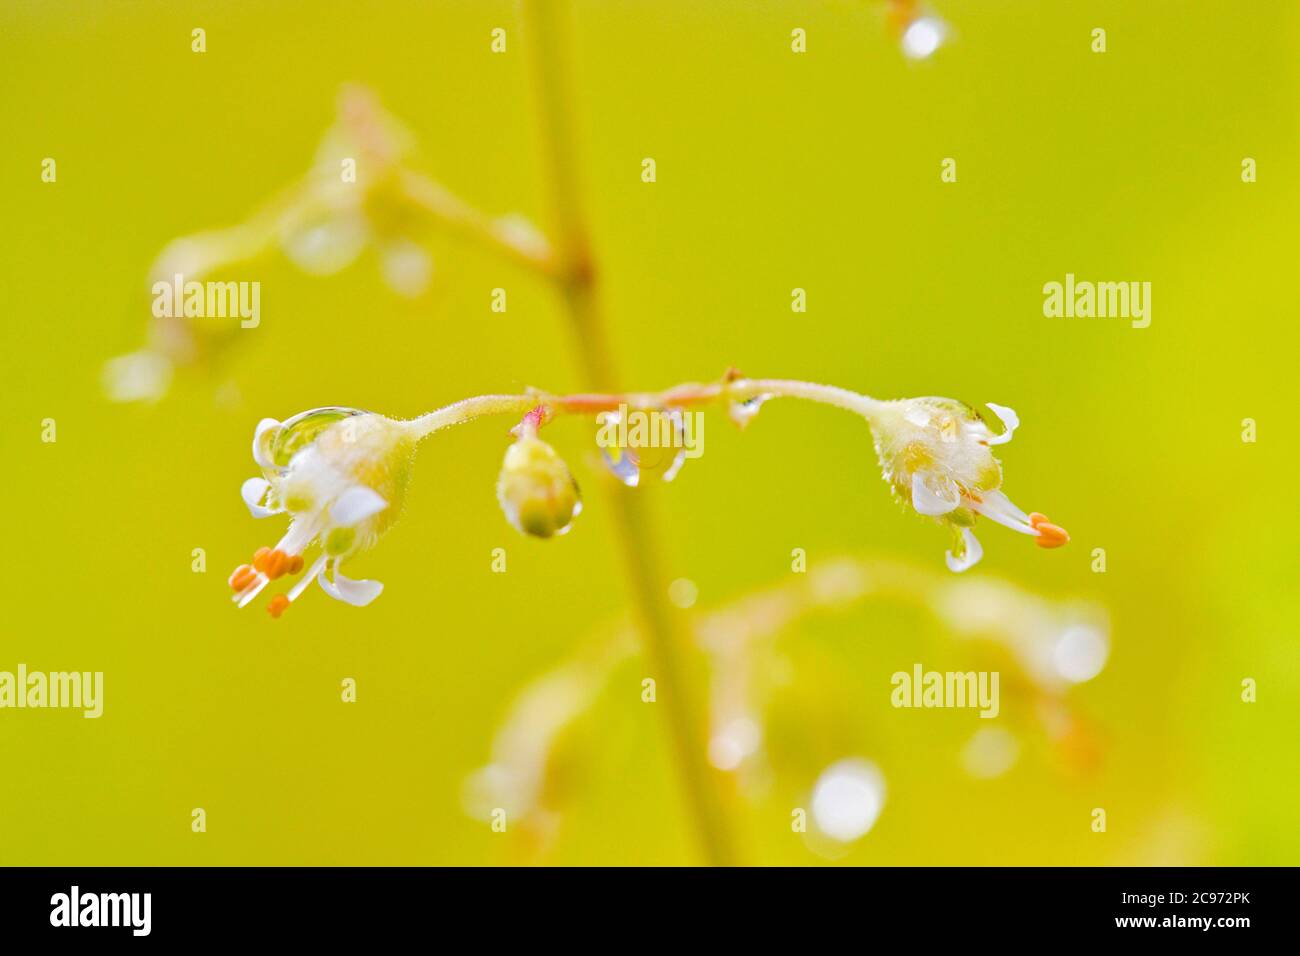 Heuchera (Heuchera x brizoides, Heuchera brizoides), flowers with waterdrops Stock Photo